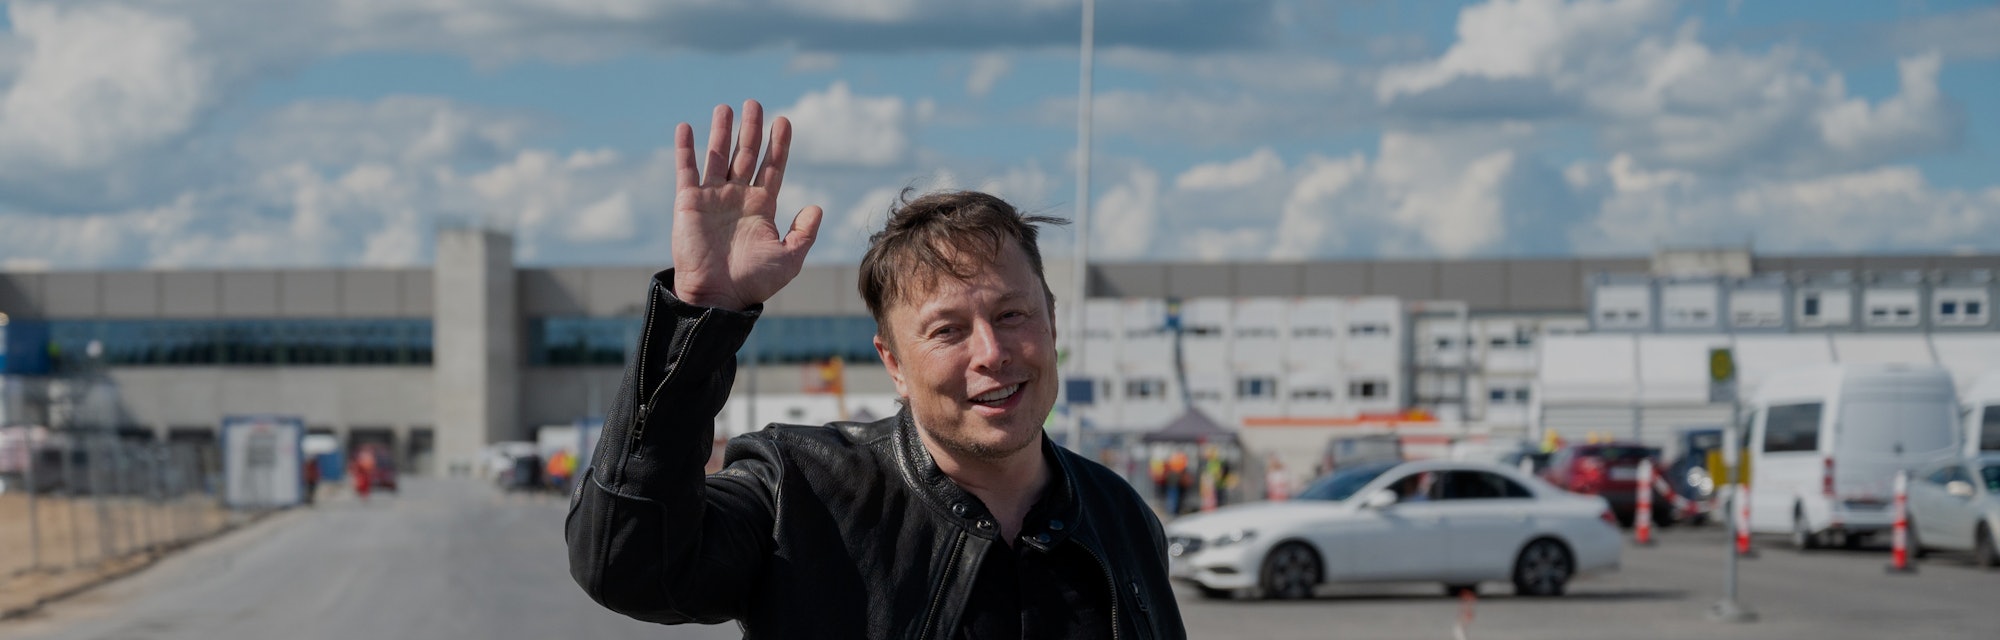 17 May 2021, Brandenburg, Grünheide: Elon Musk, Tesla CEO, stands on the construction site of the Te...